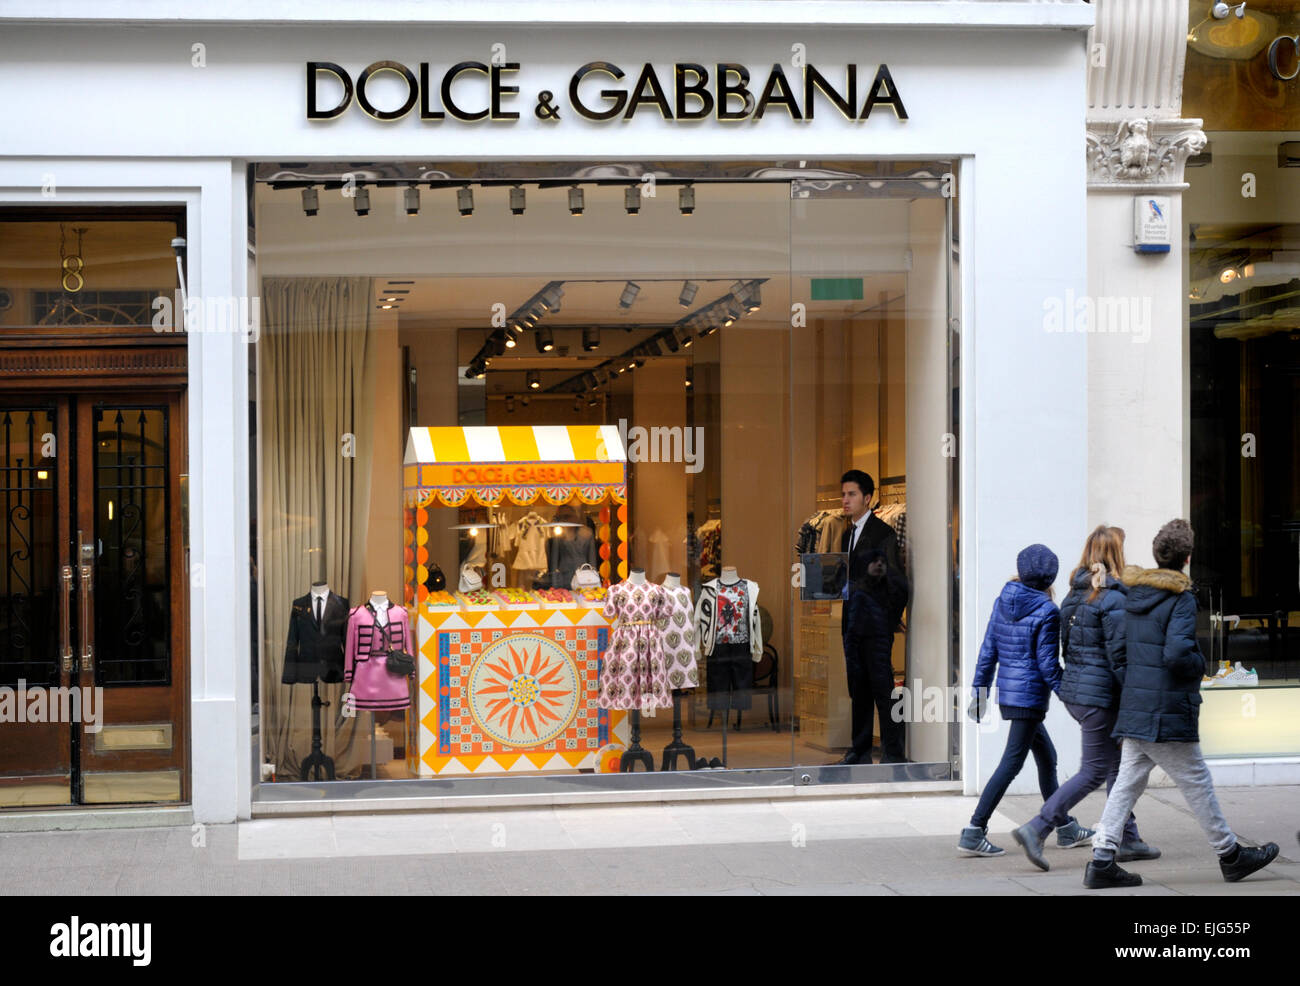 dolce and gabbana stores